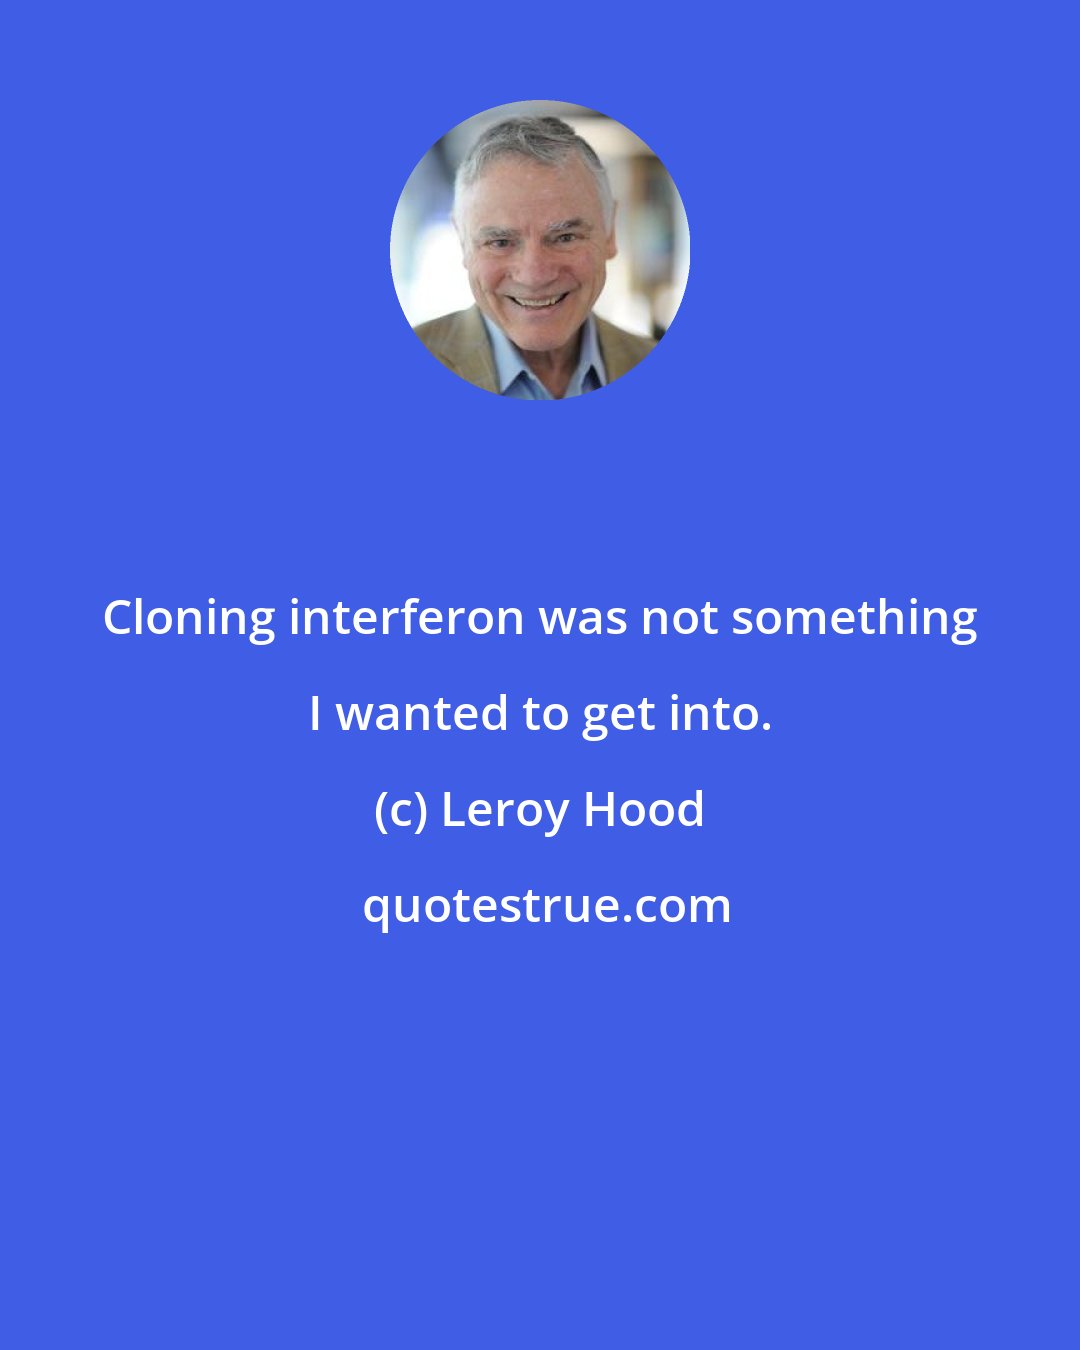 Leroy Hood: Cloning interferon was not something I wanted to get into.